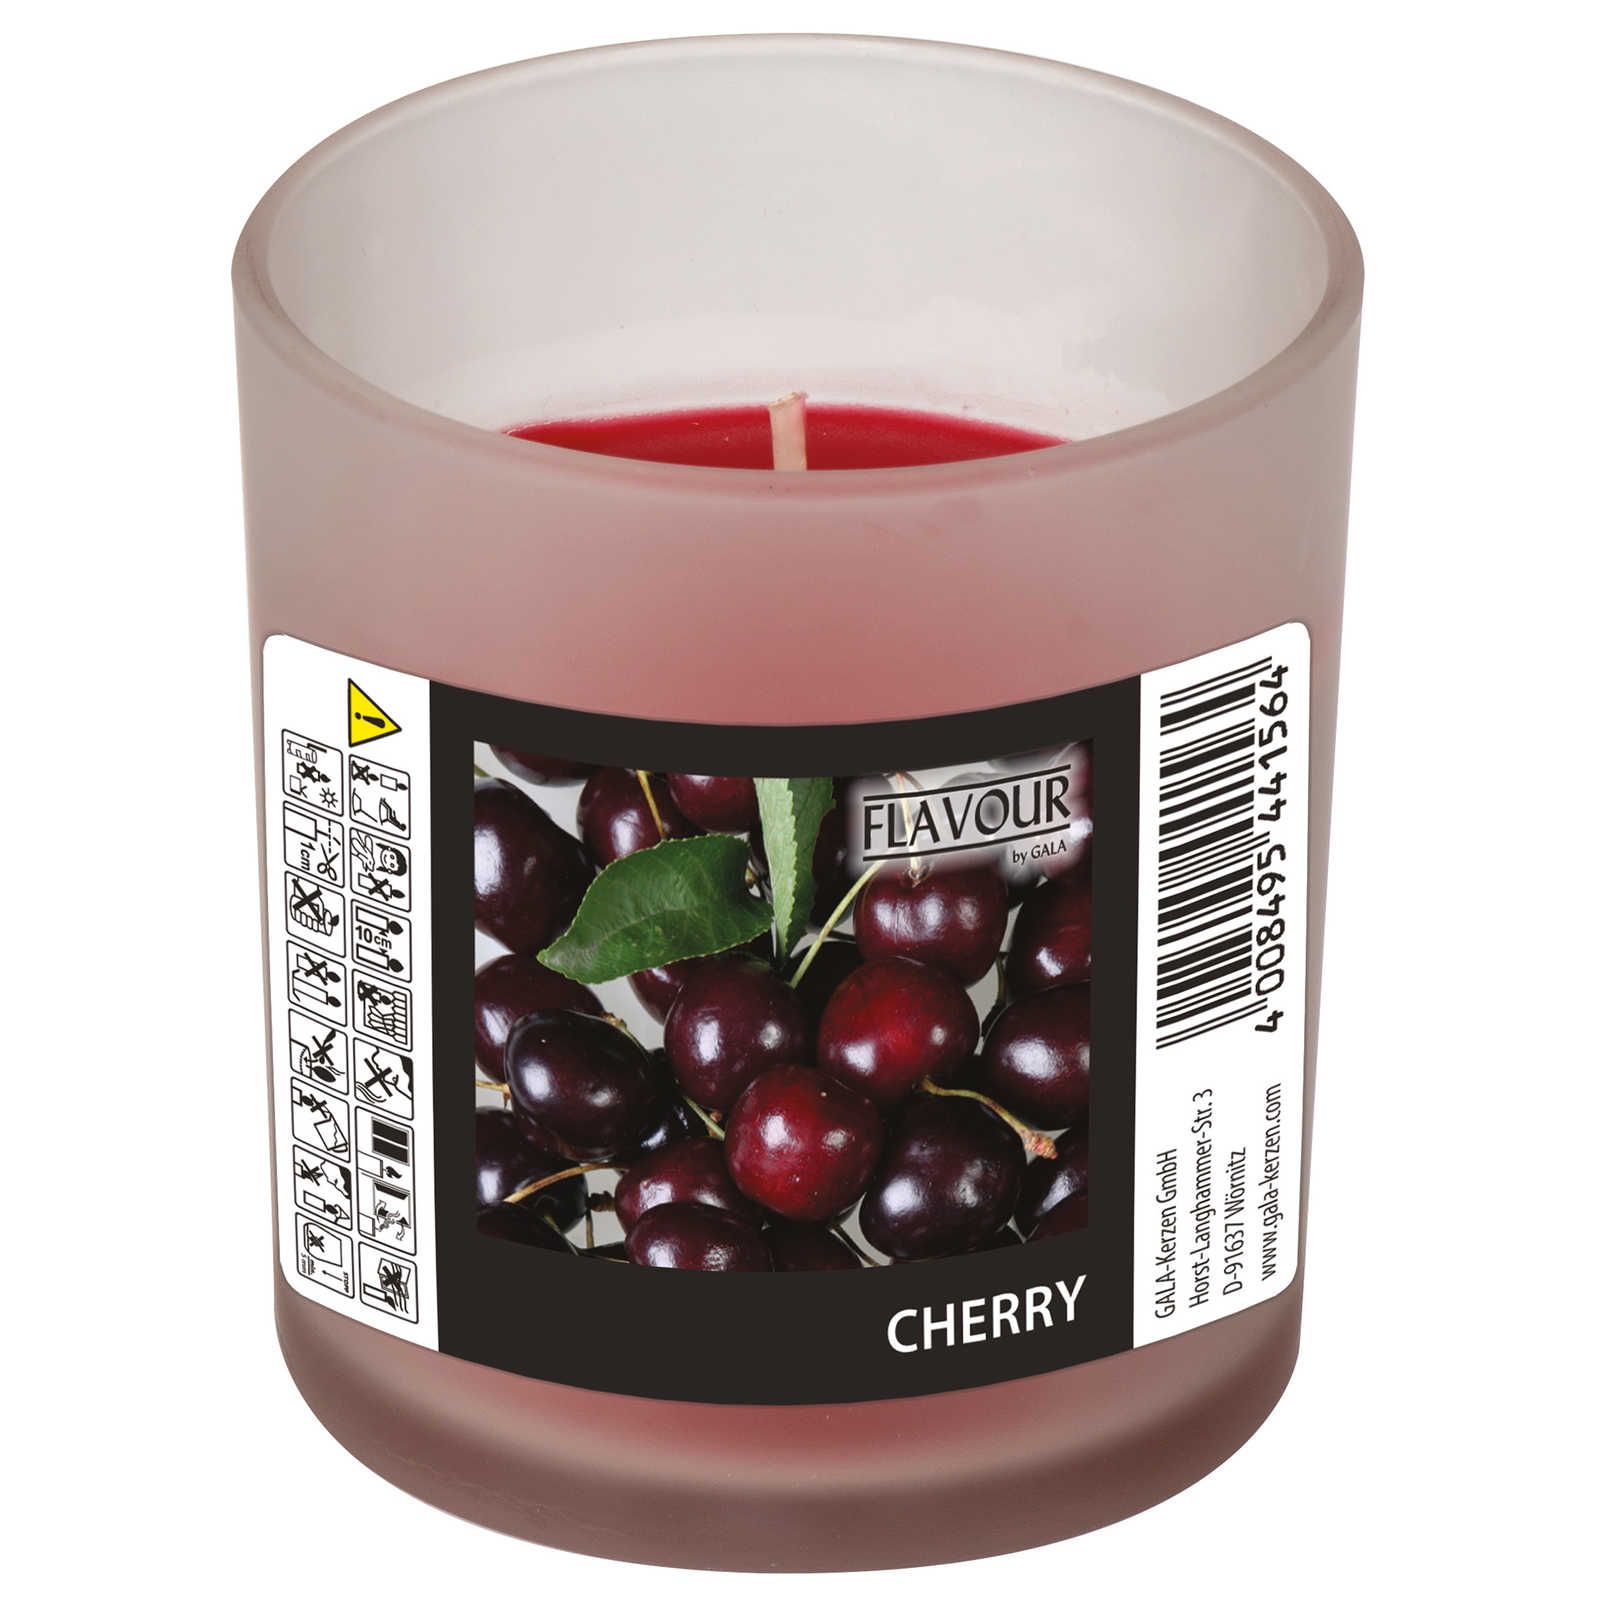         Cherry scented candle with fruit sweet scent - 110g
    